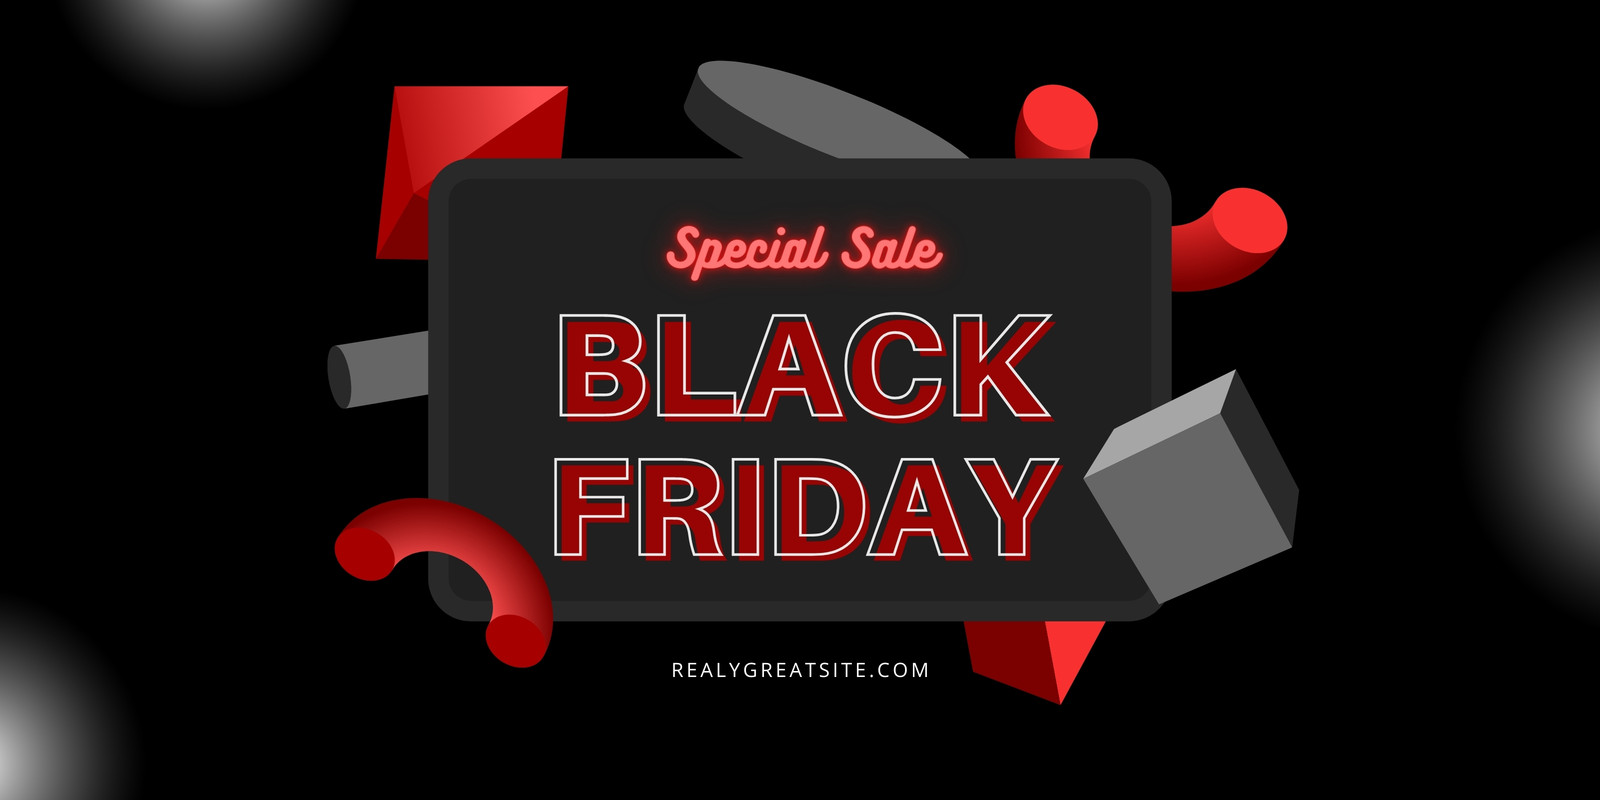 Page 2 - Free custom printable Black Friday banner templates | Canva